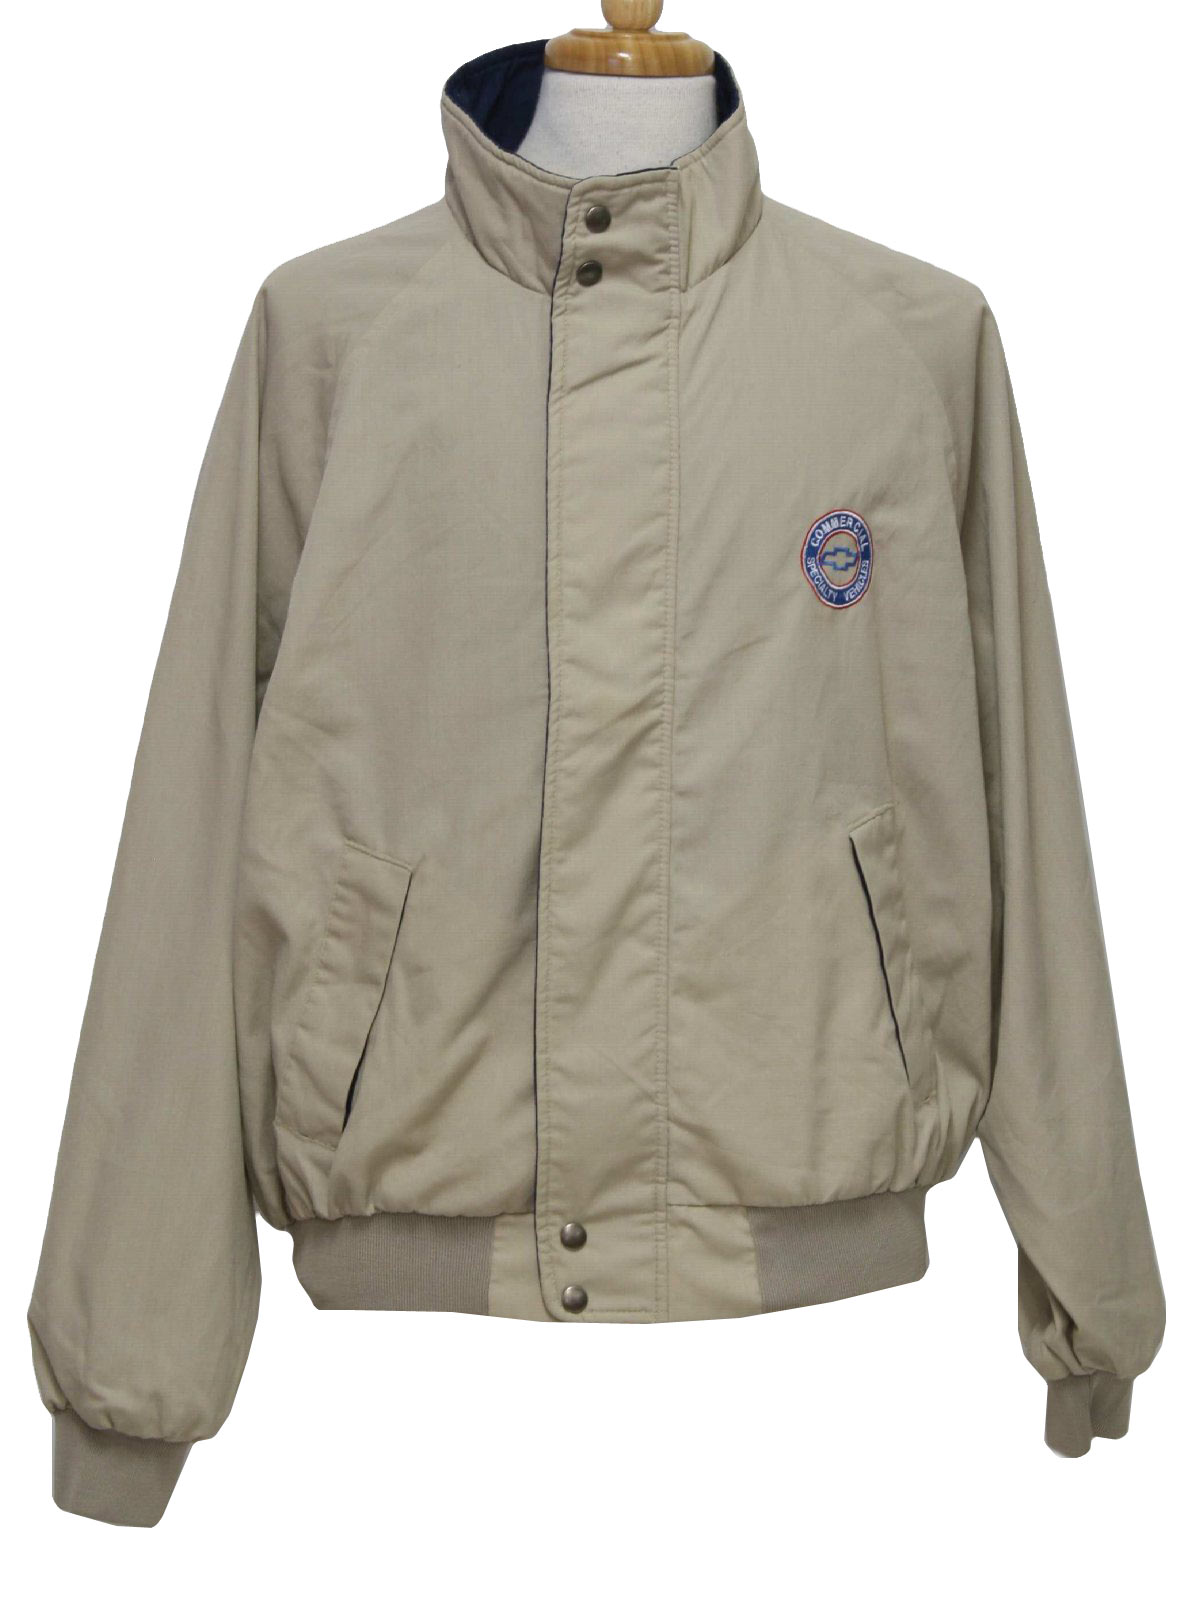 Retro 80s Jacket (Swingster) : 80s -Swingster- Mens beige cotton and ...